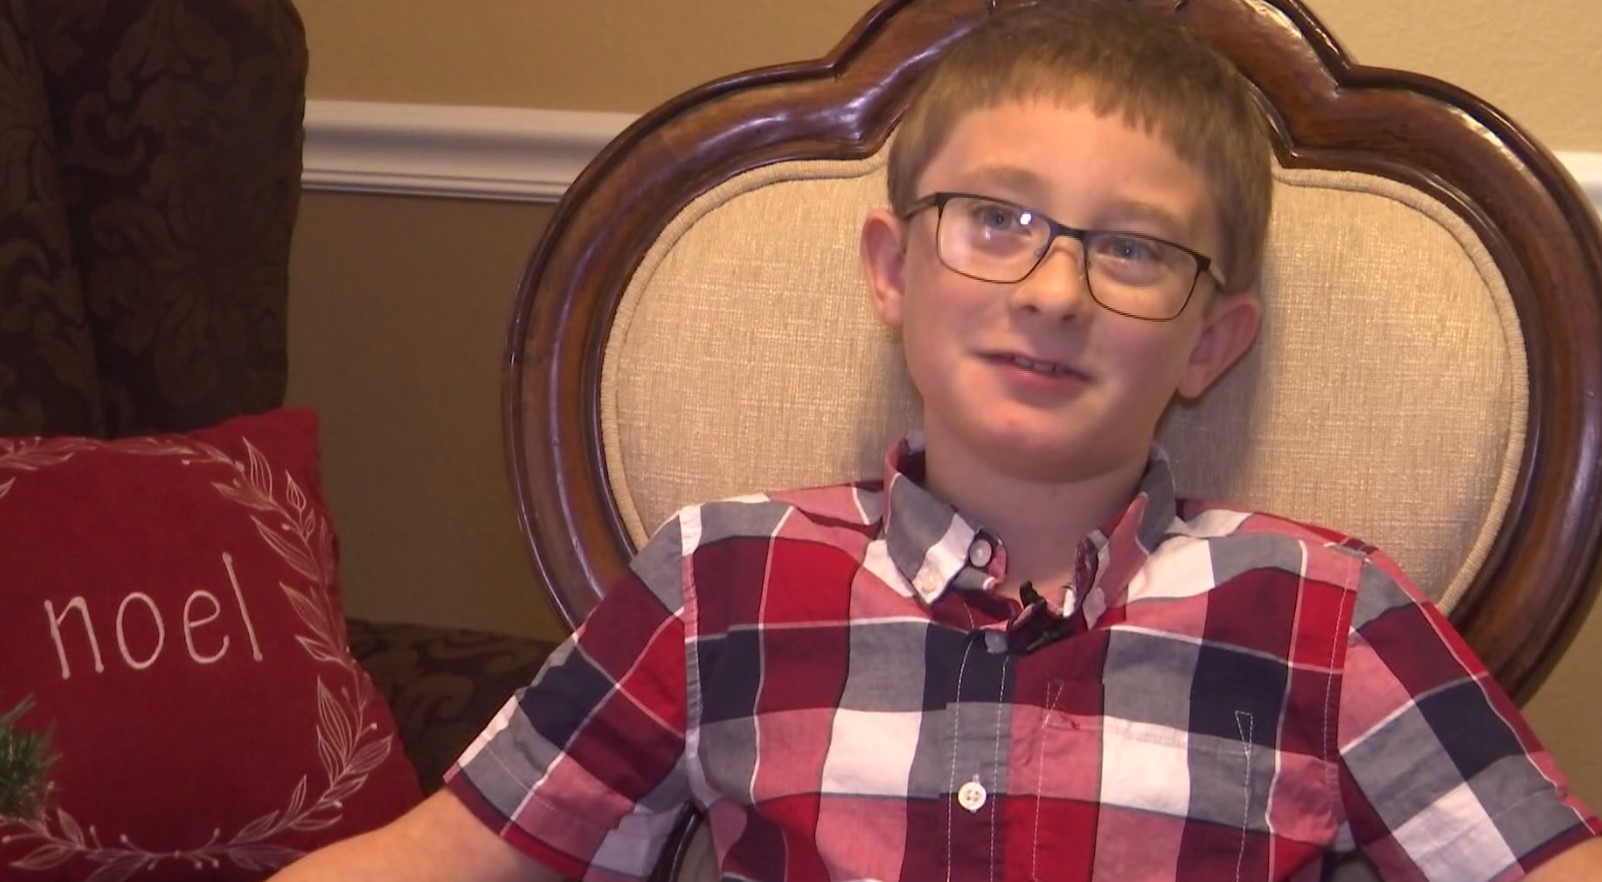 Charlotte County Boy Battling Cancer Is Paying It Forward With Toy Drive